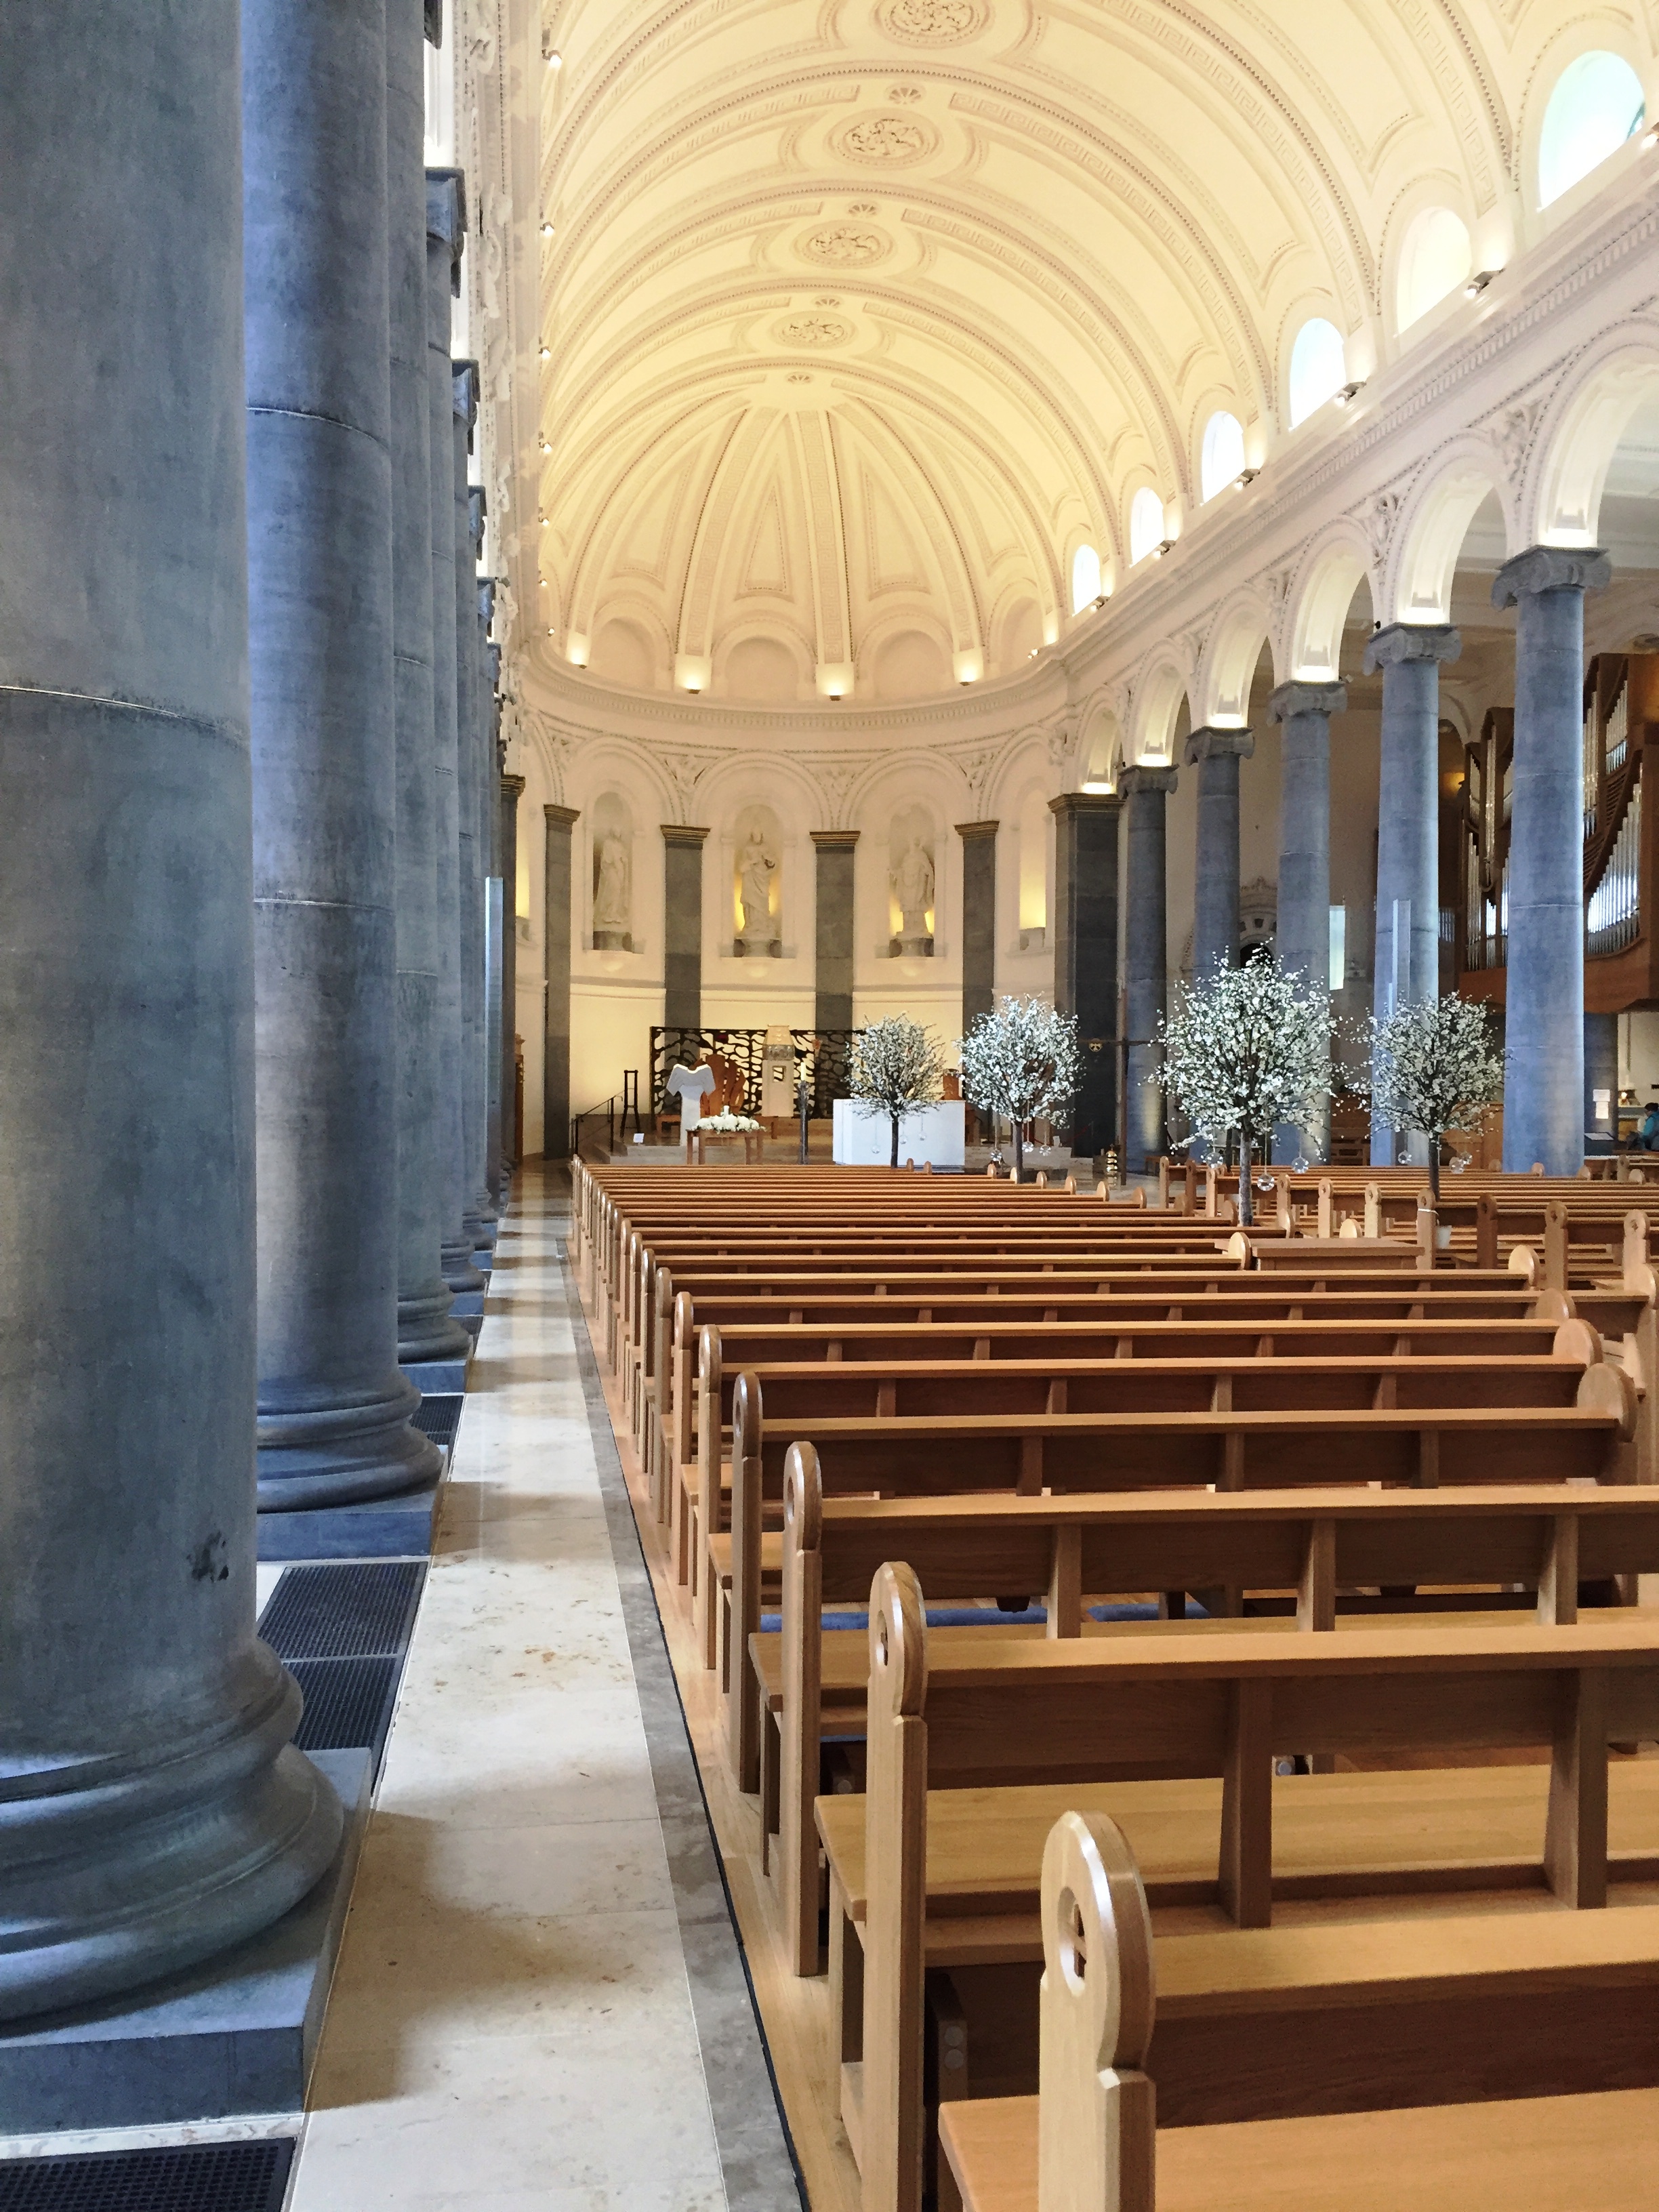 Inside St. Mel's cathedral in Longford. Photo by Martha Clark.